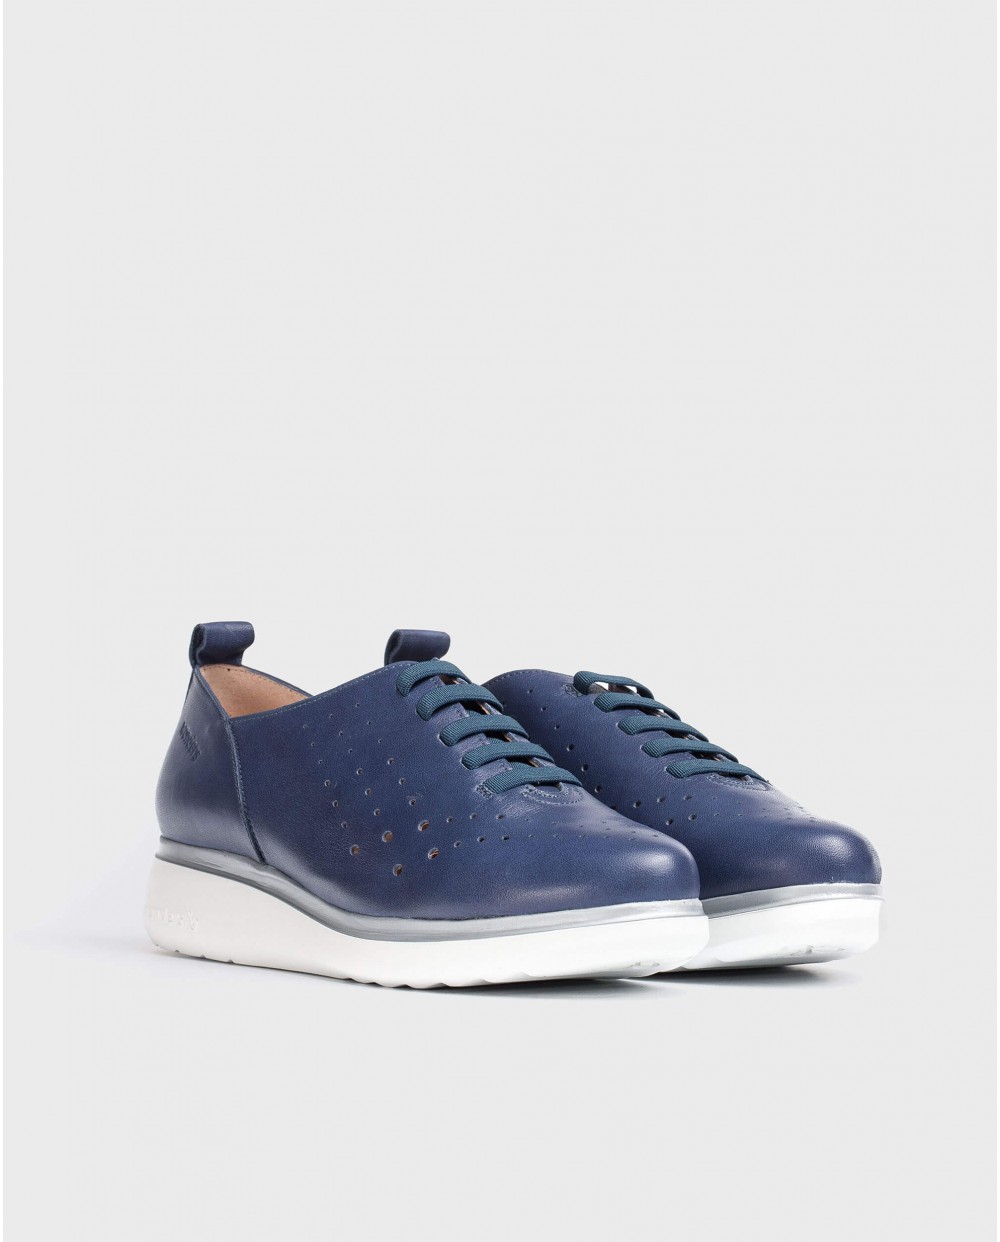 Wonders-Outlet-Leather sneakers with elastic detail